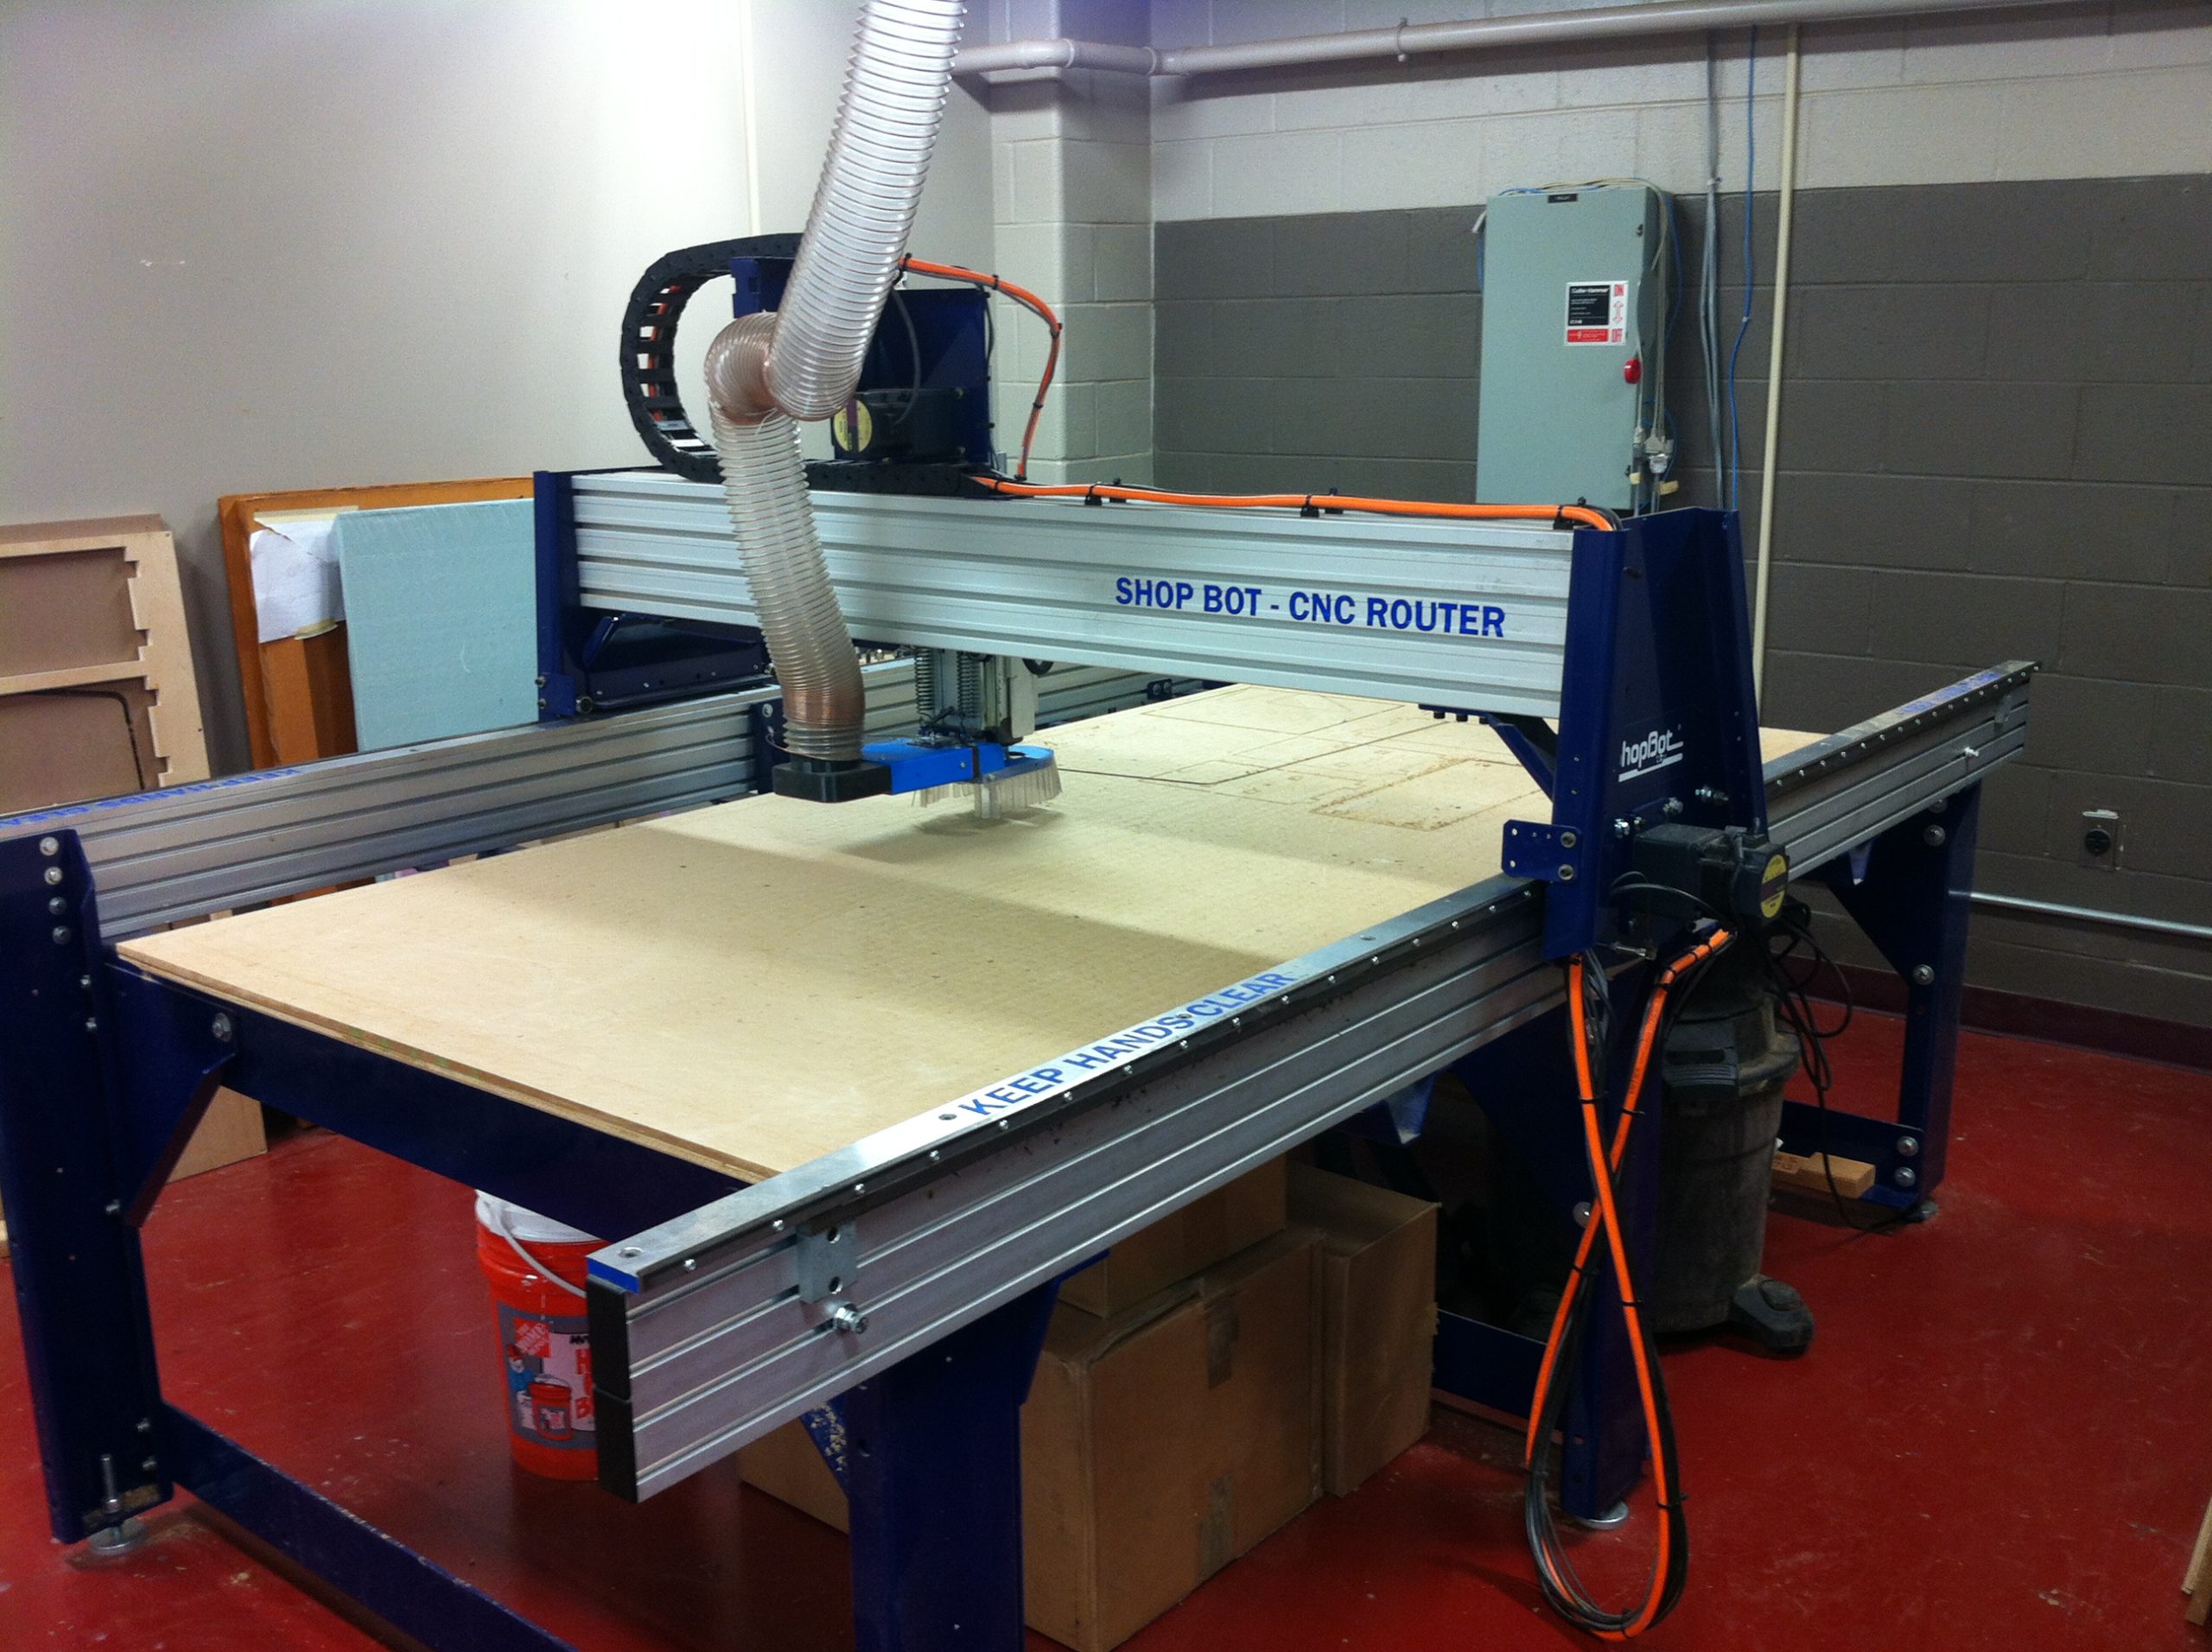 The ShopBot CNC router at Fab Lab Baltimore.